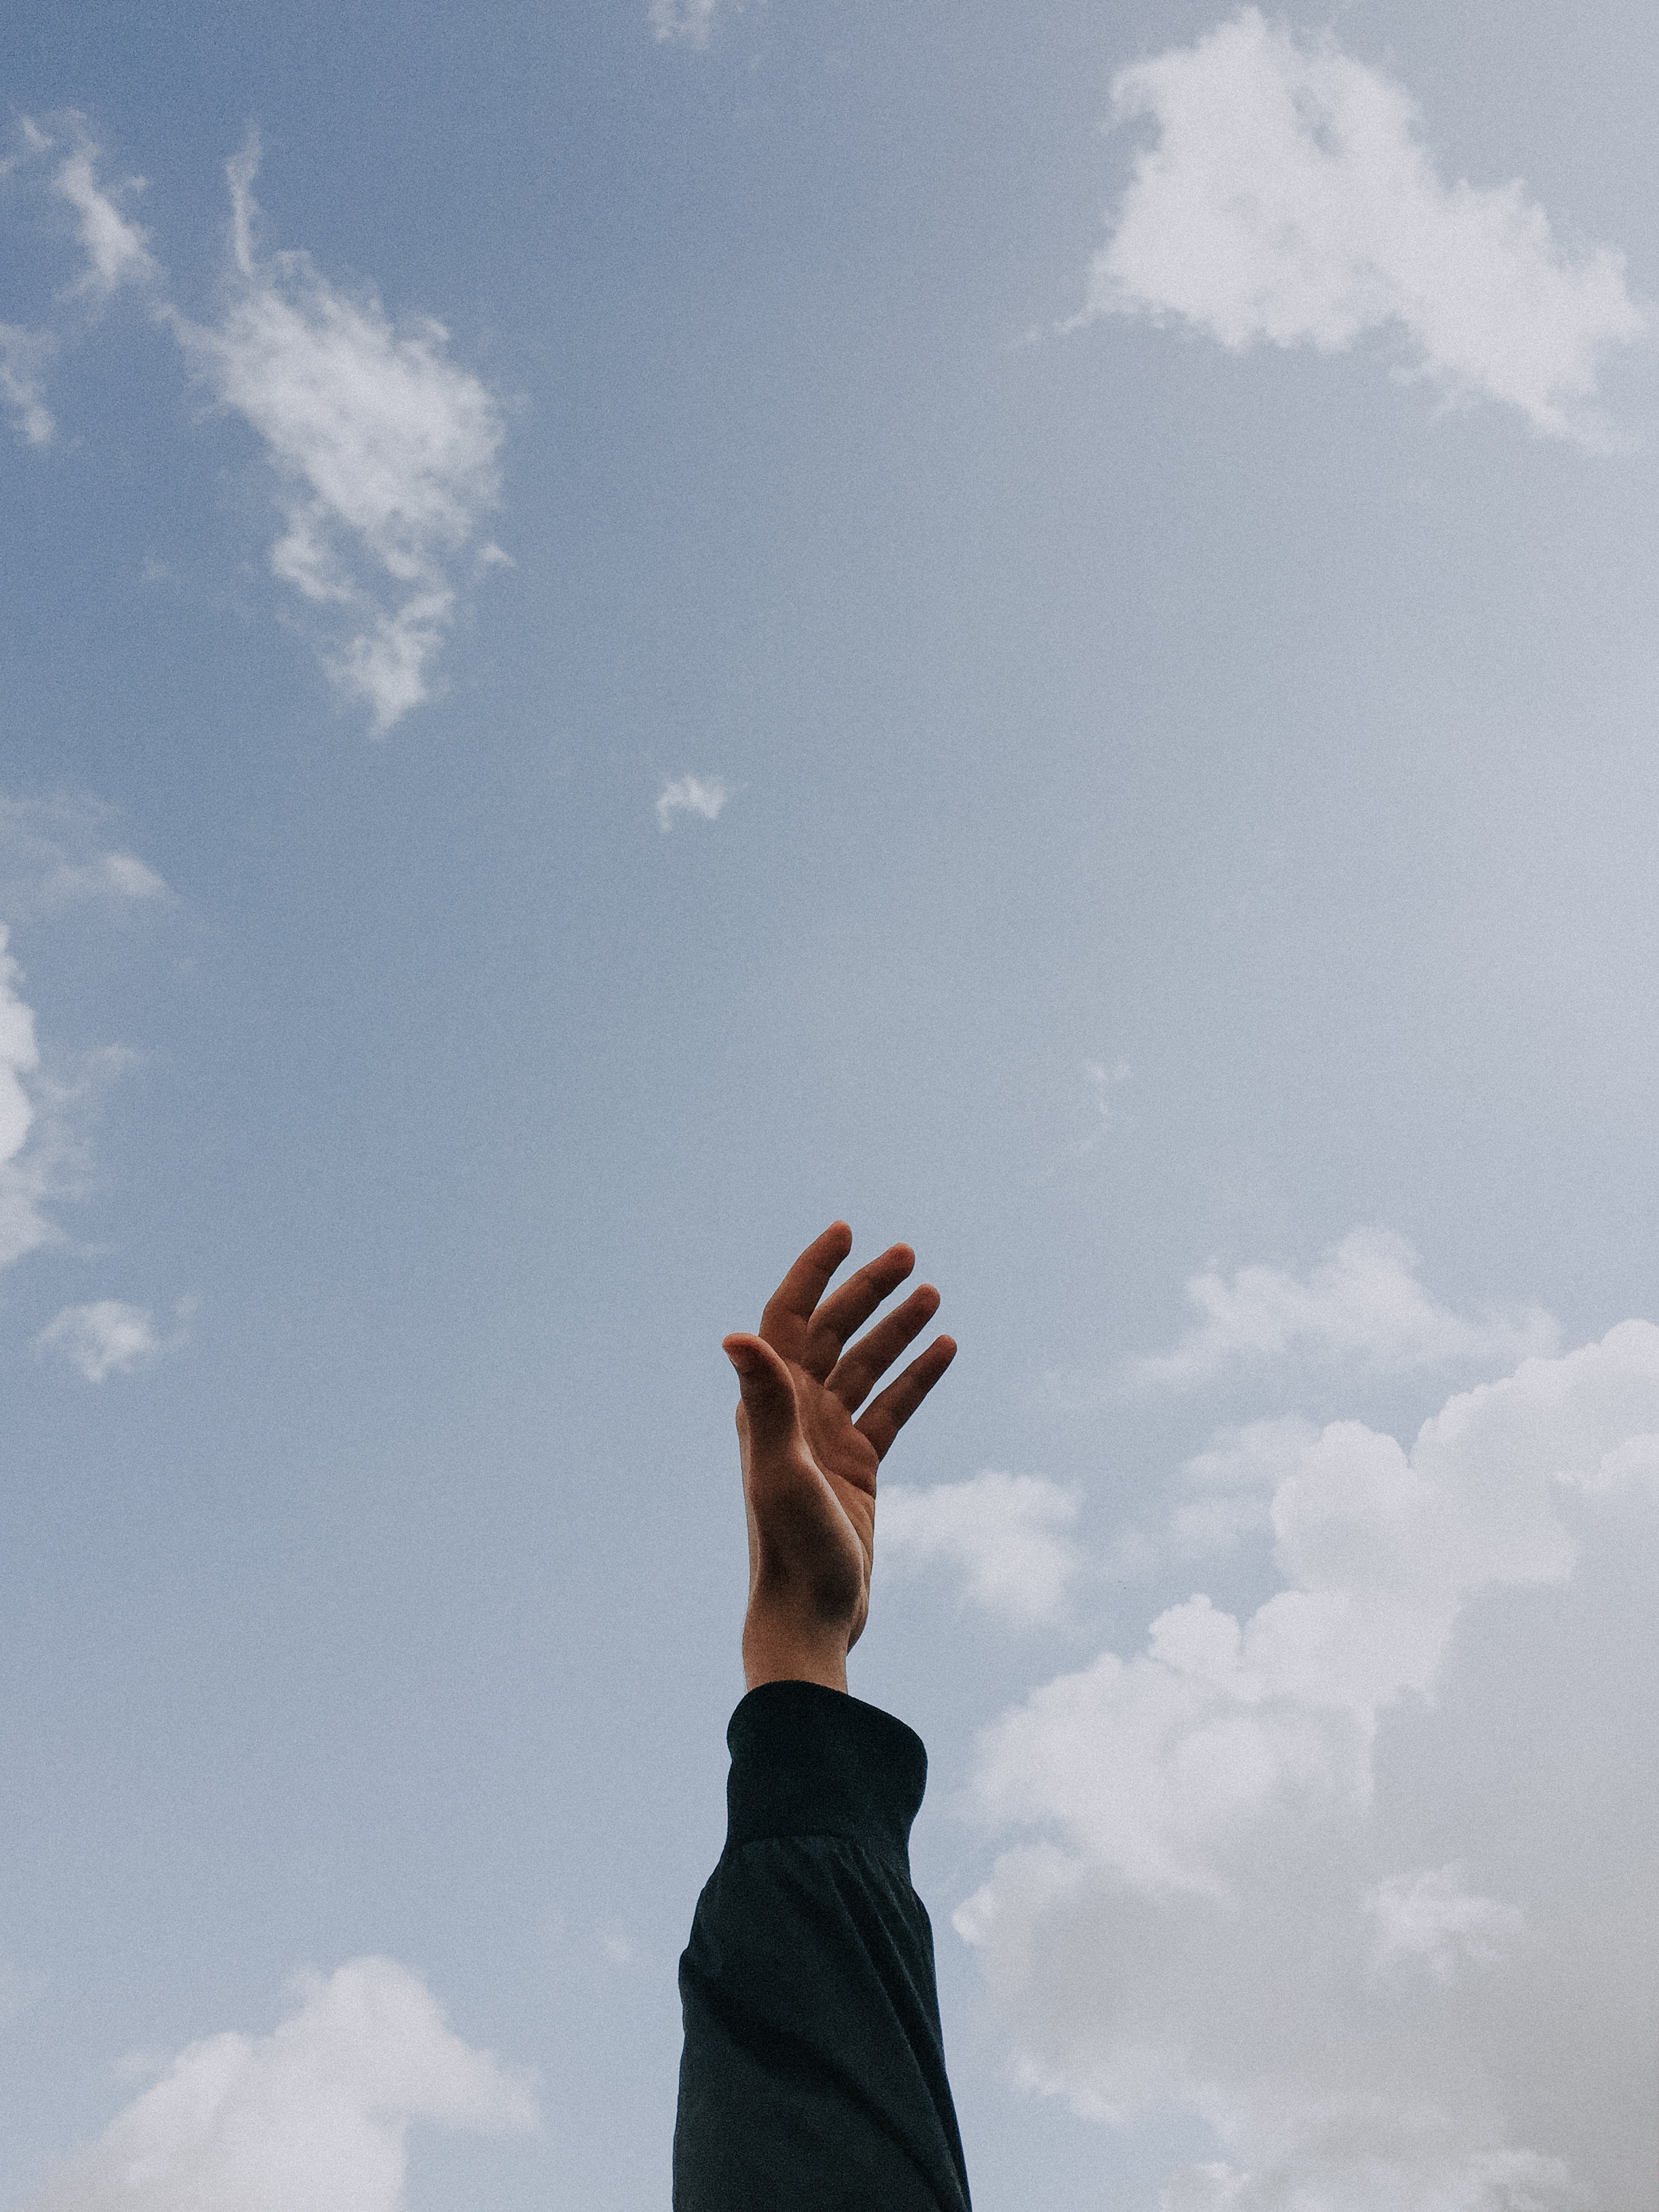 freedom, hand, fingers, minimalism, clouds, sky, lift up, raise